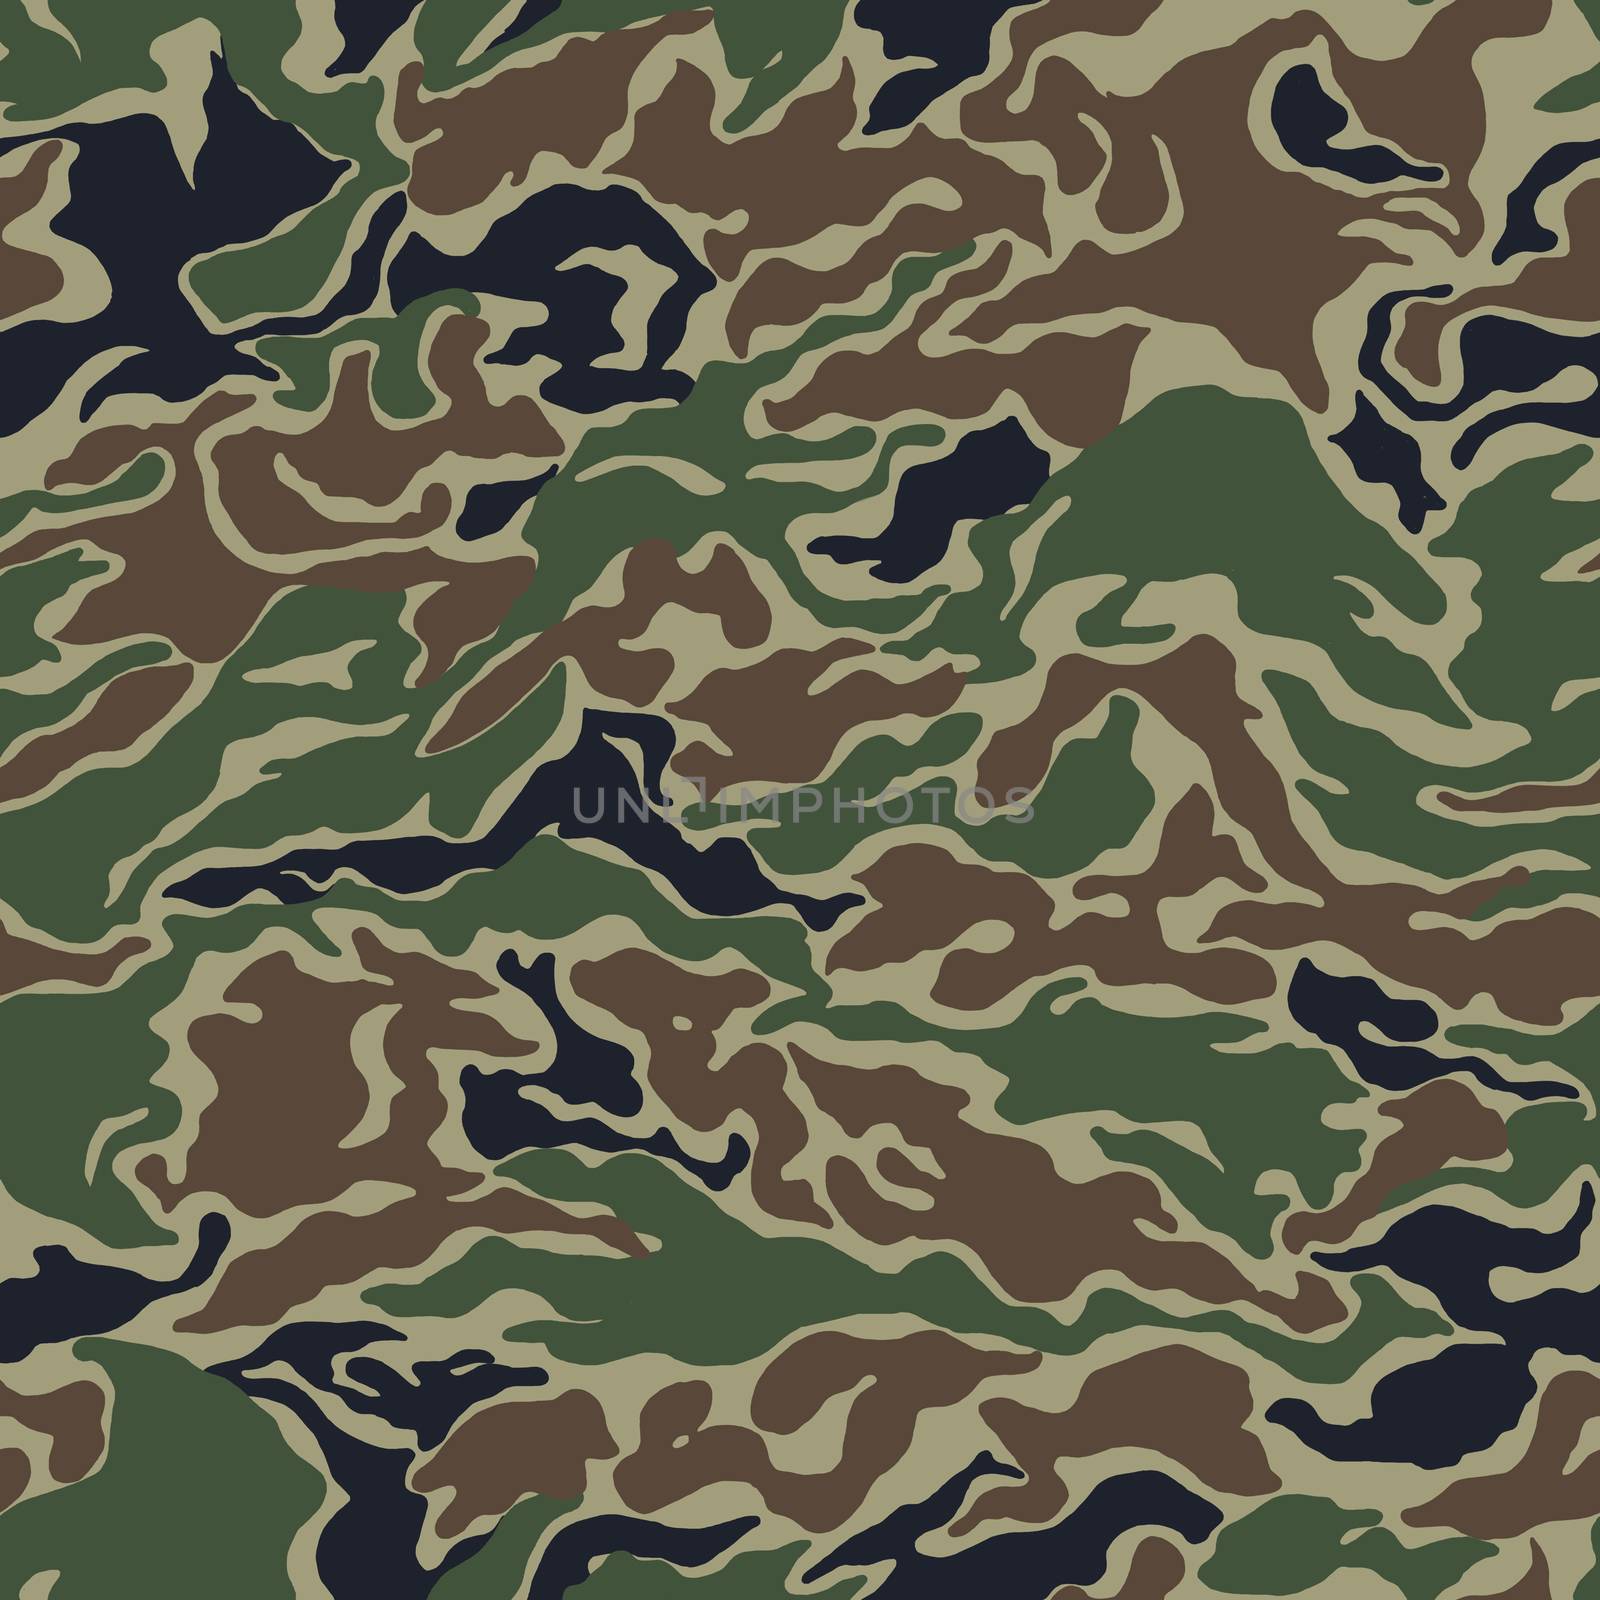 Army camouflage pattern design in multicolored color.Texture or background by Mastak80